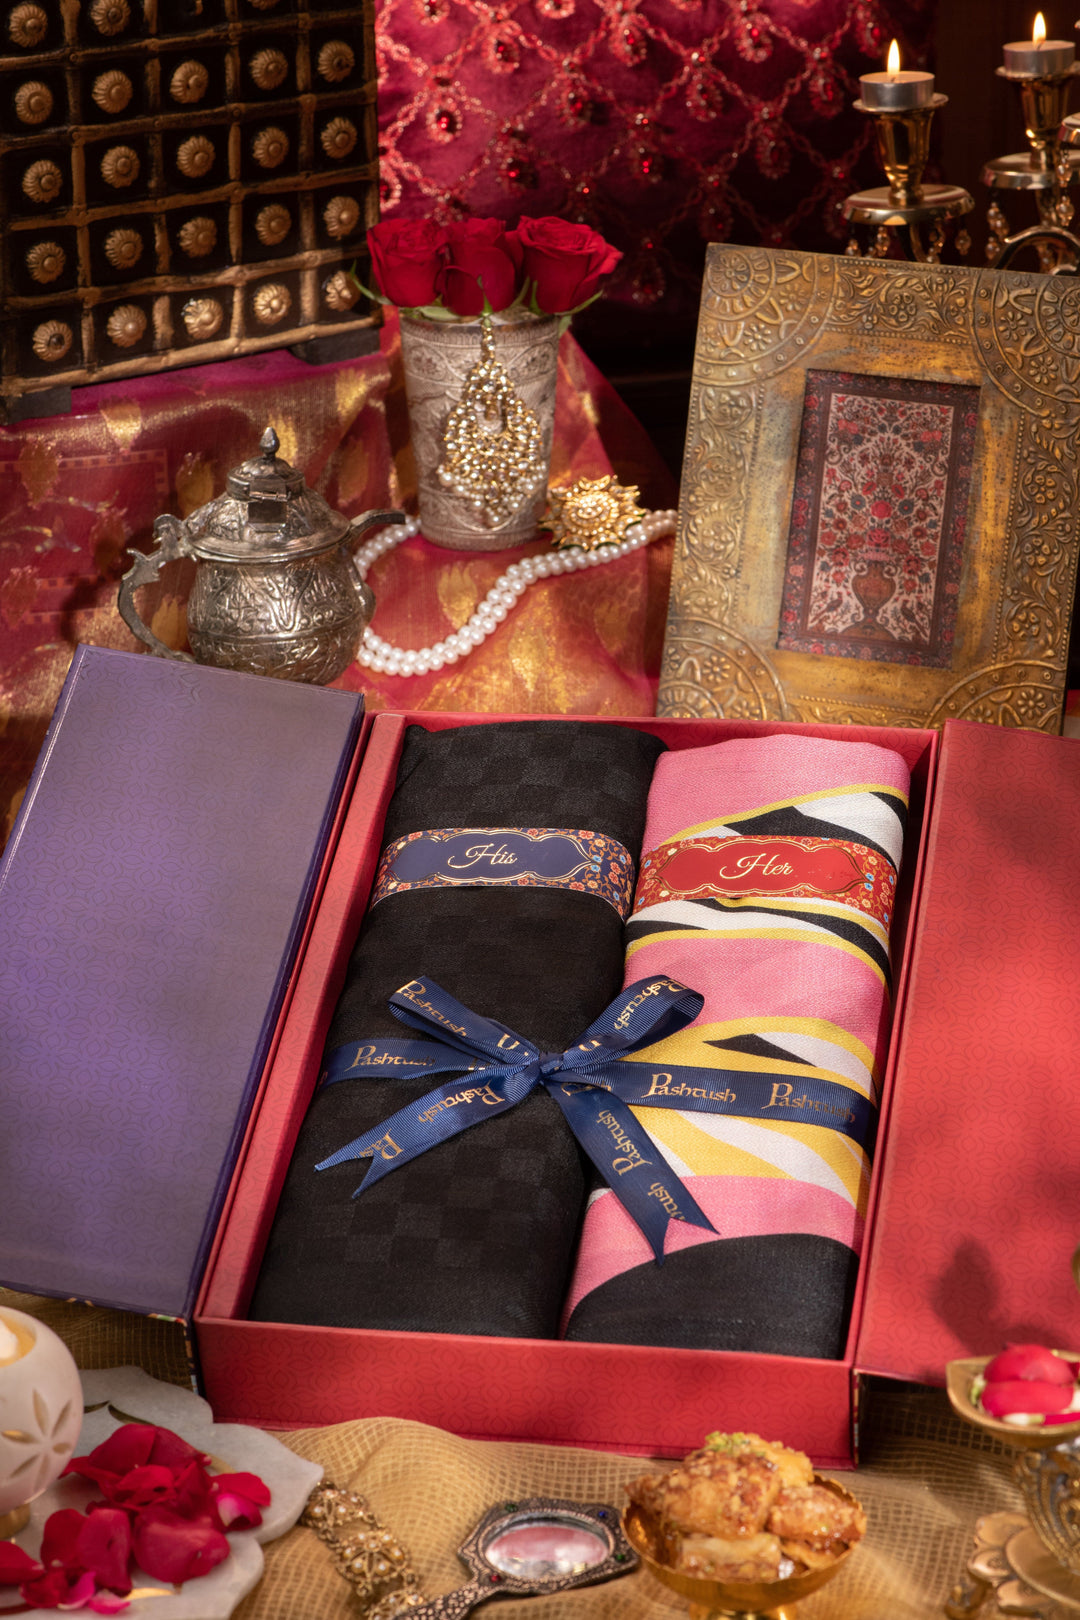 Pashtush India Gift Pack Pashtush His And Her Gift Set Of Checkered Fine Wool Stole and Printed Bamboo Stole With Premium Gift Box Packaging, Black and Multicolour